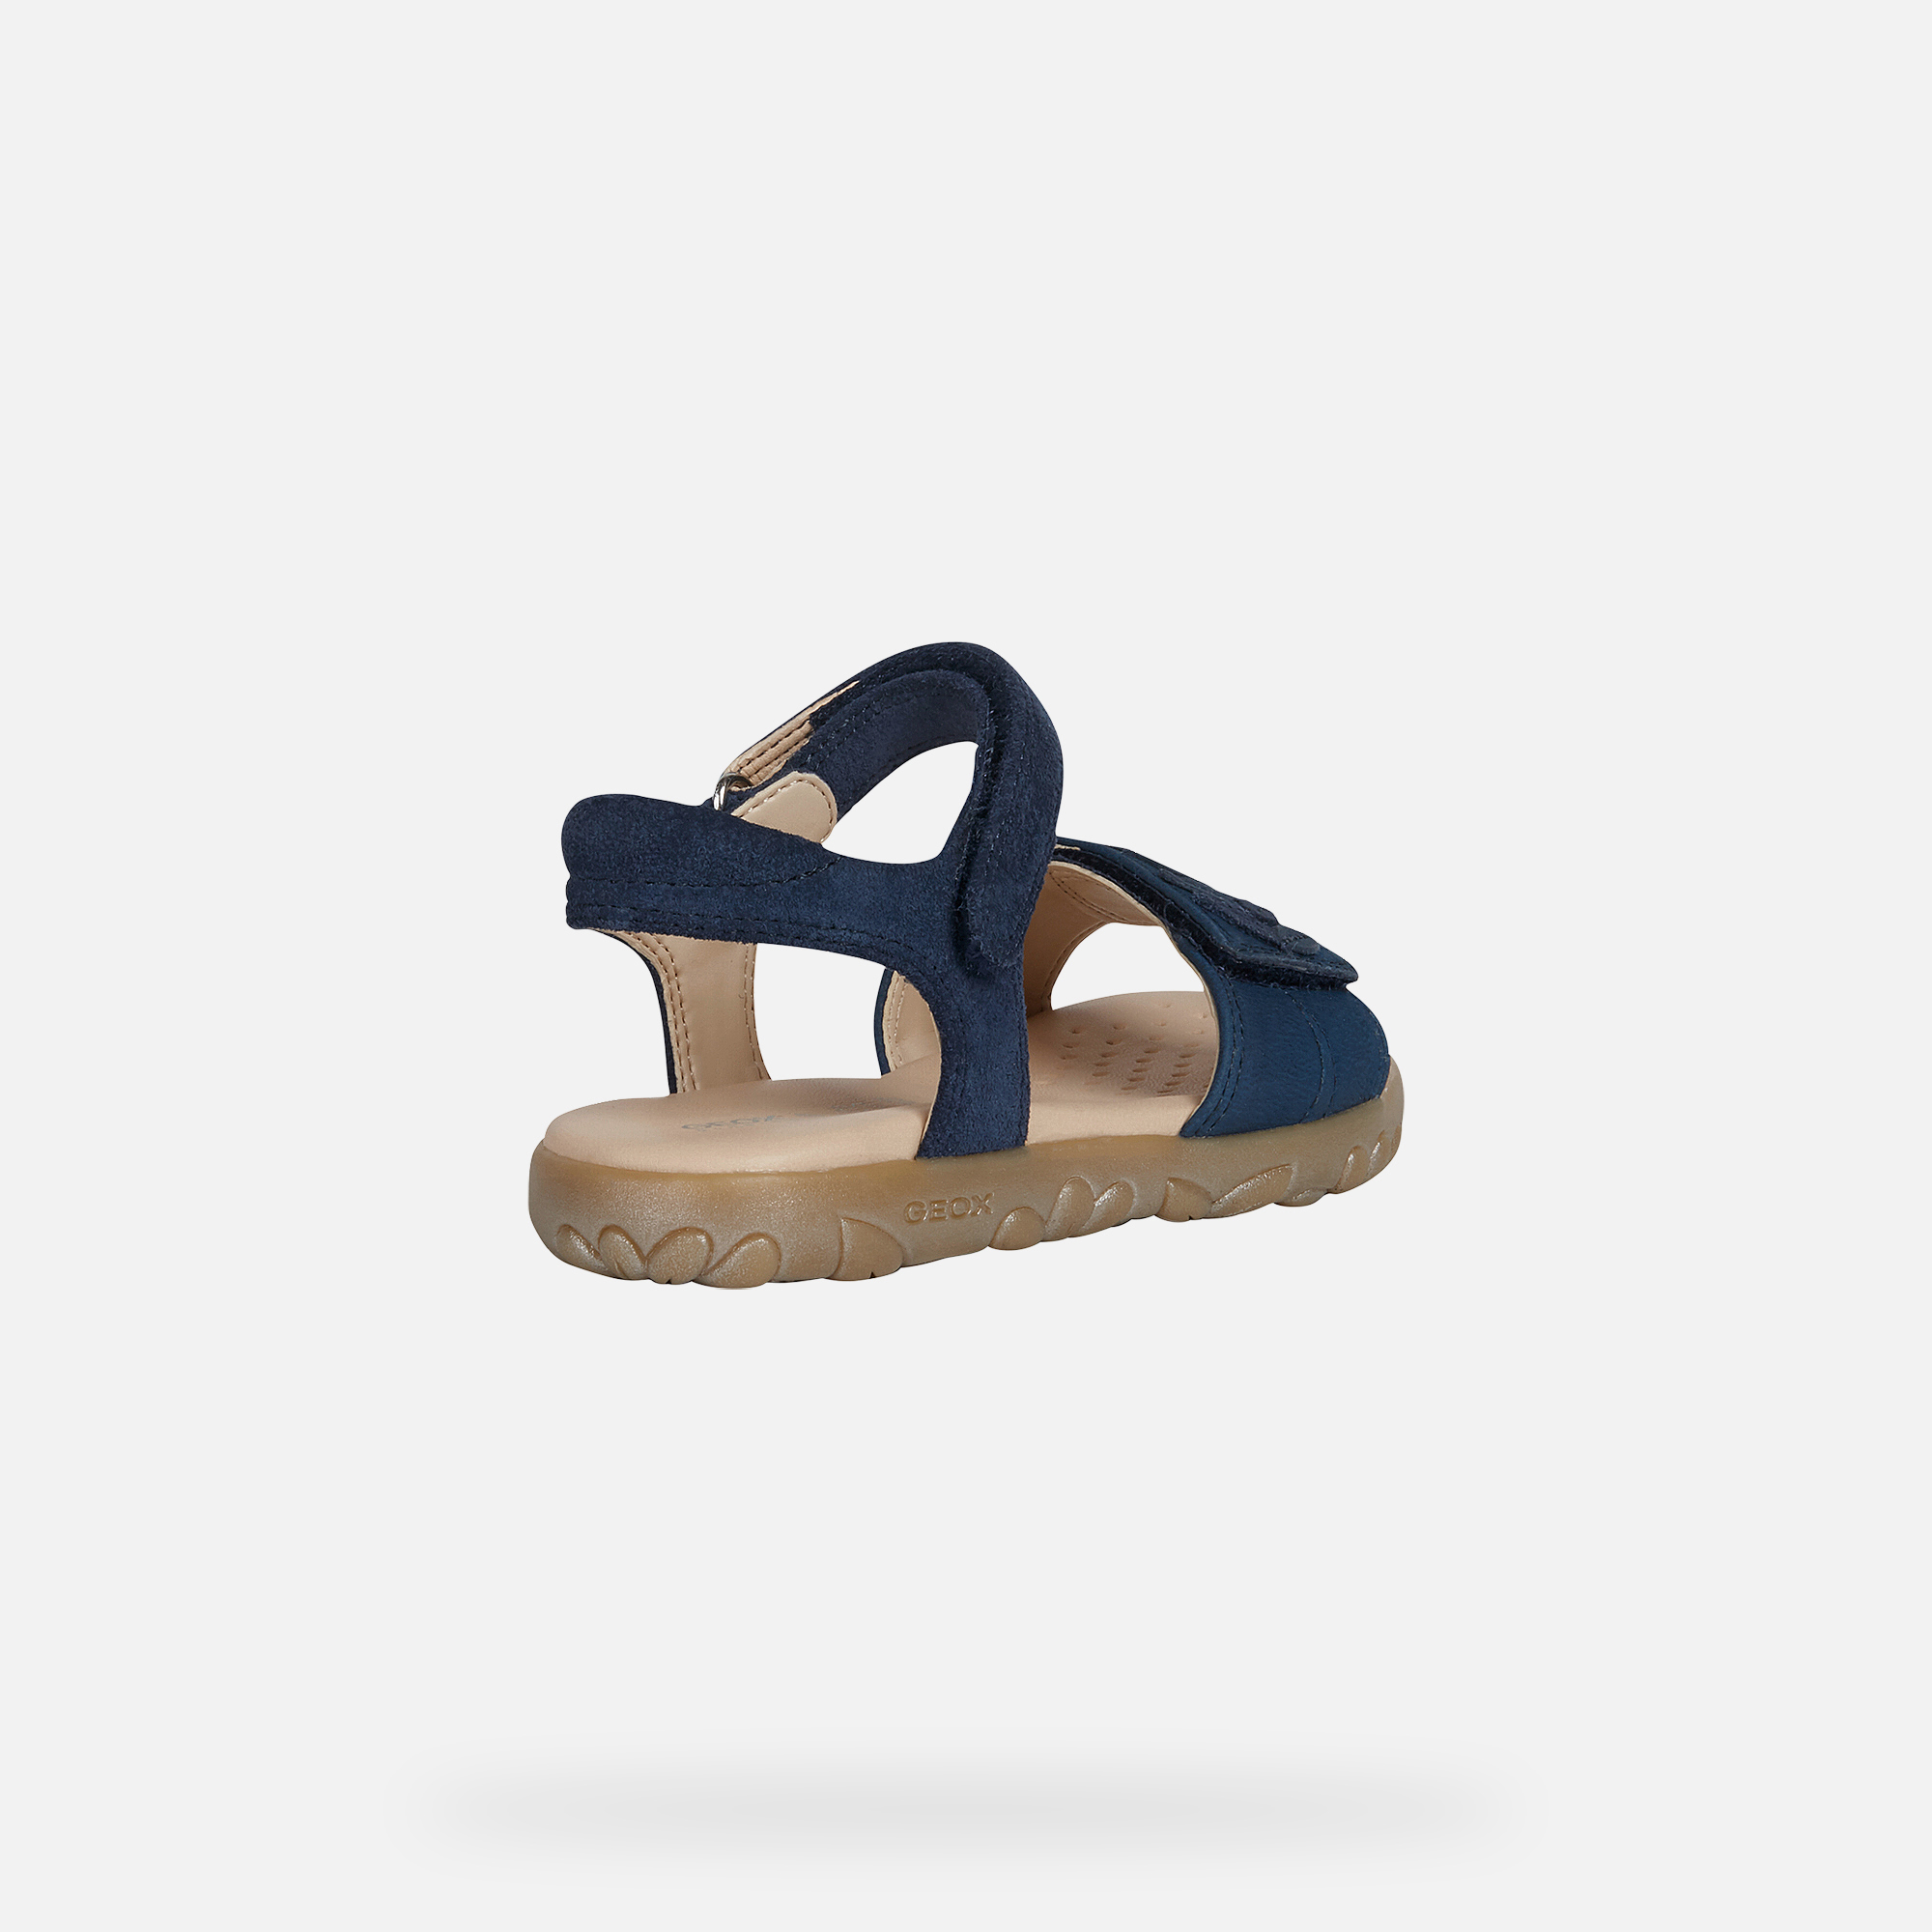 Geox HAITI Girl: Navy Sandals | Geox ® Official Store